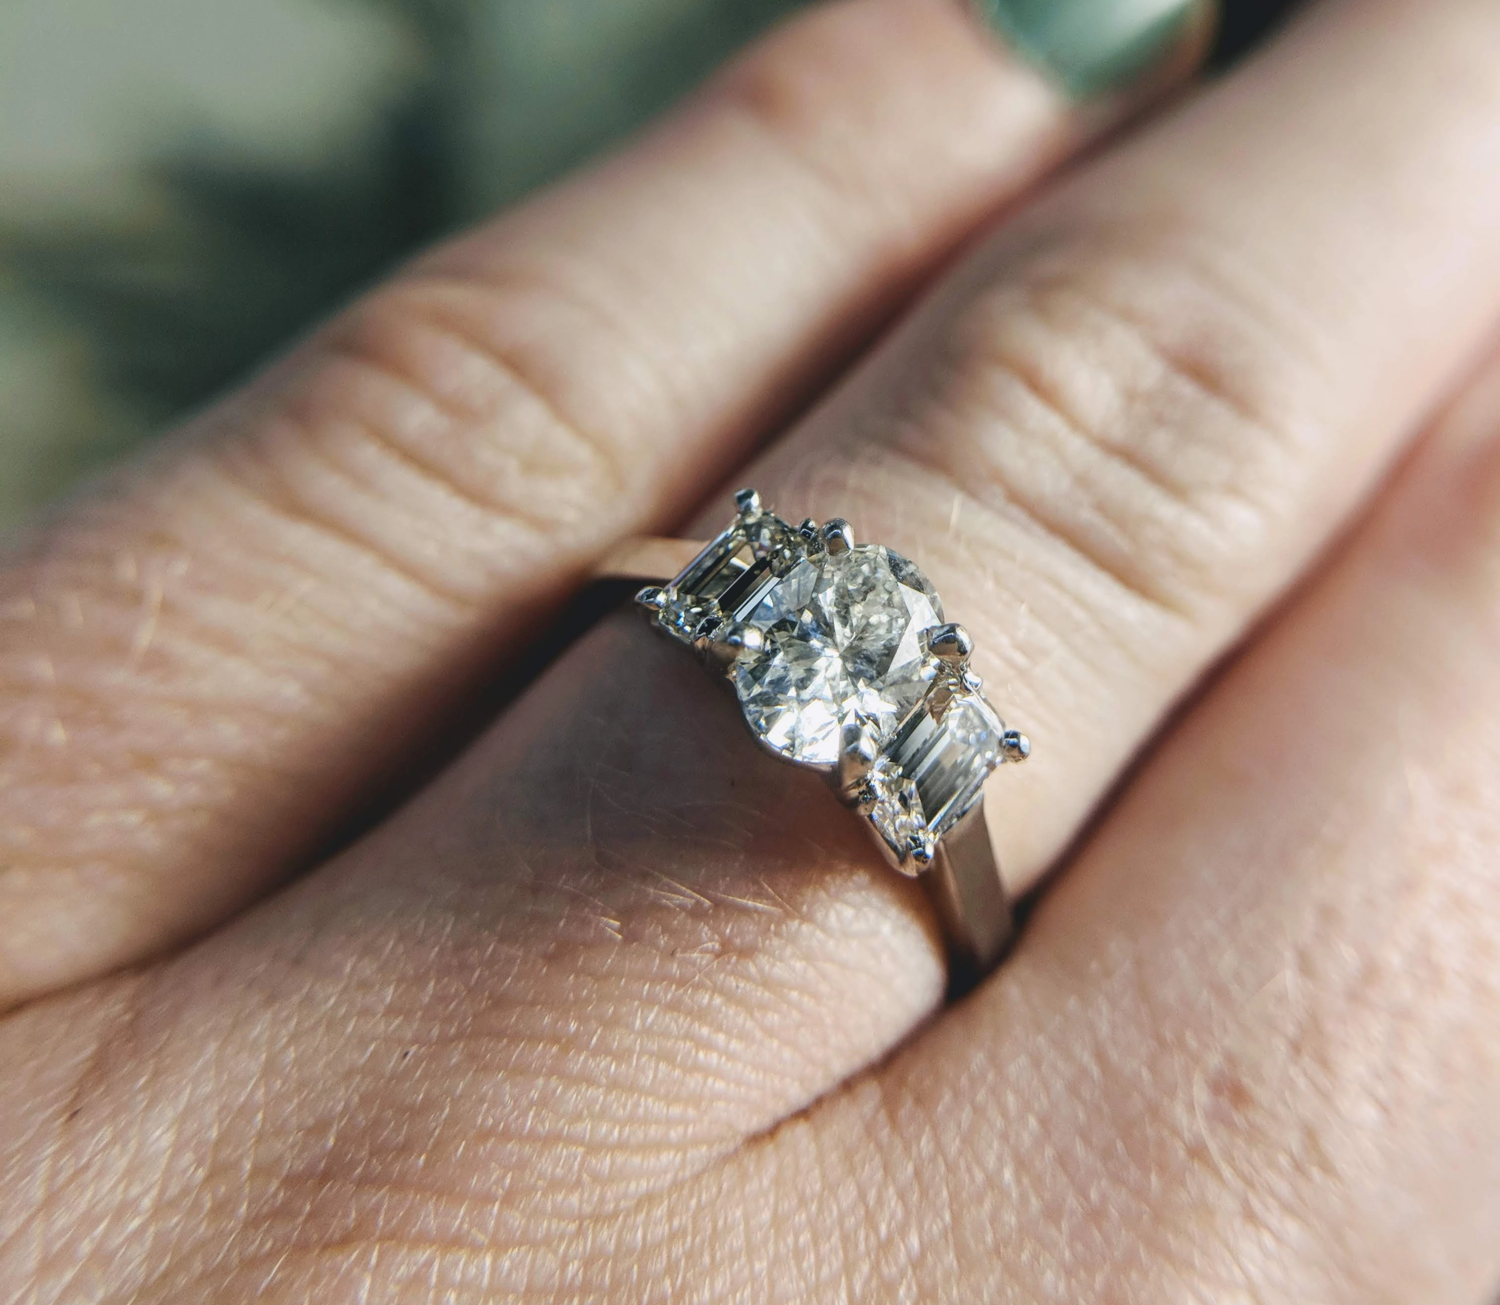 How Much Should You Spend On An Engagement Ring? Secrète Fine Jewelry